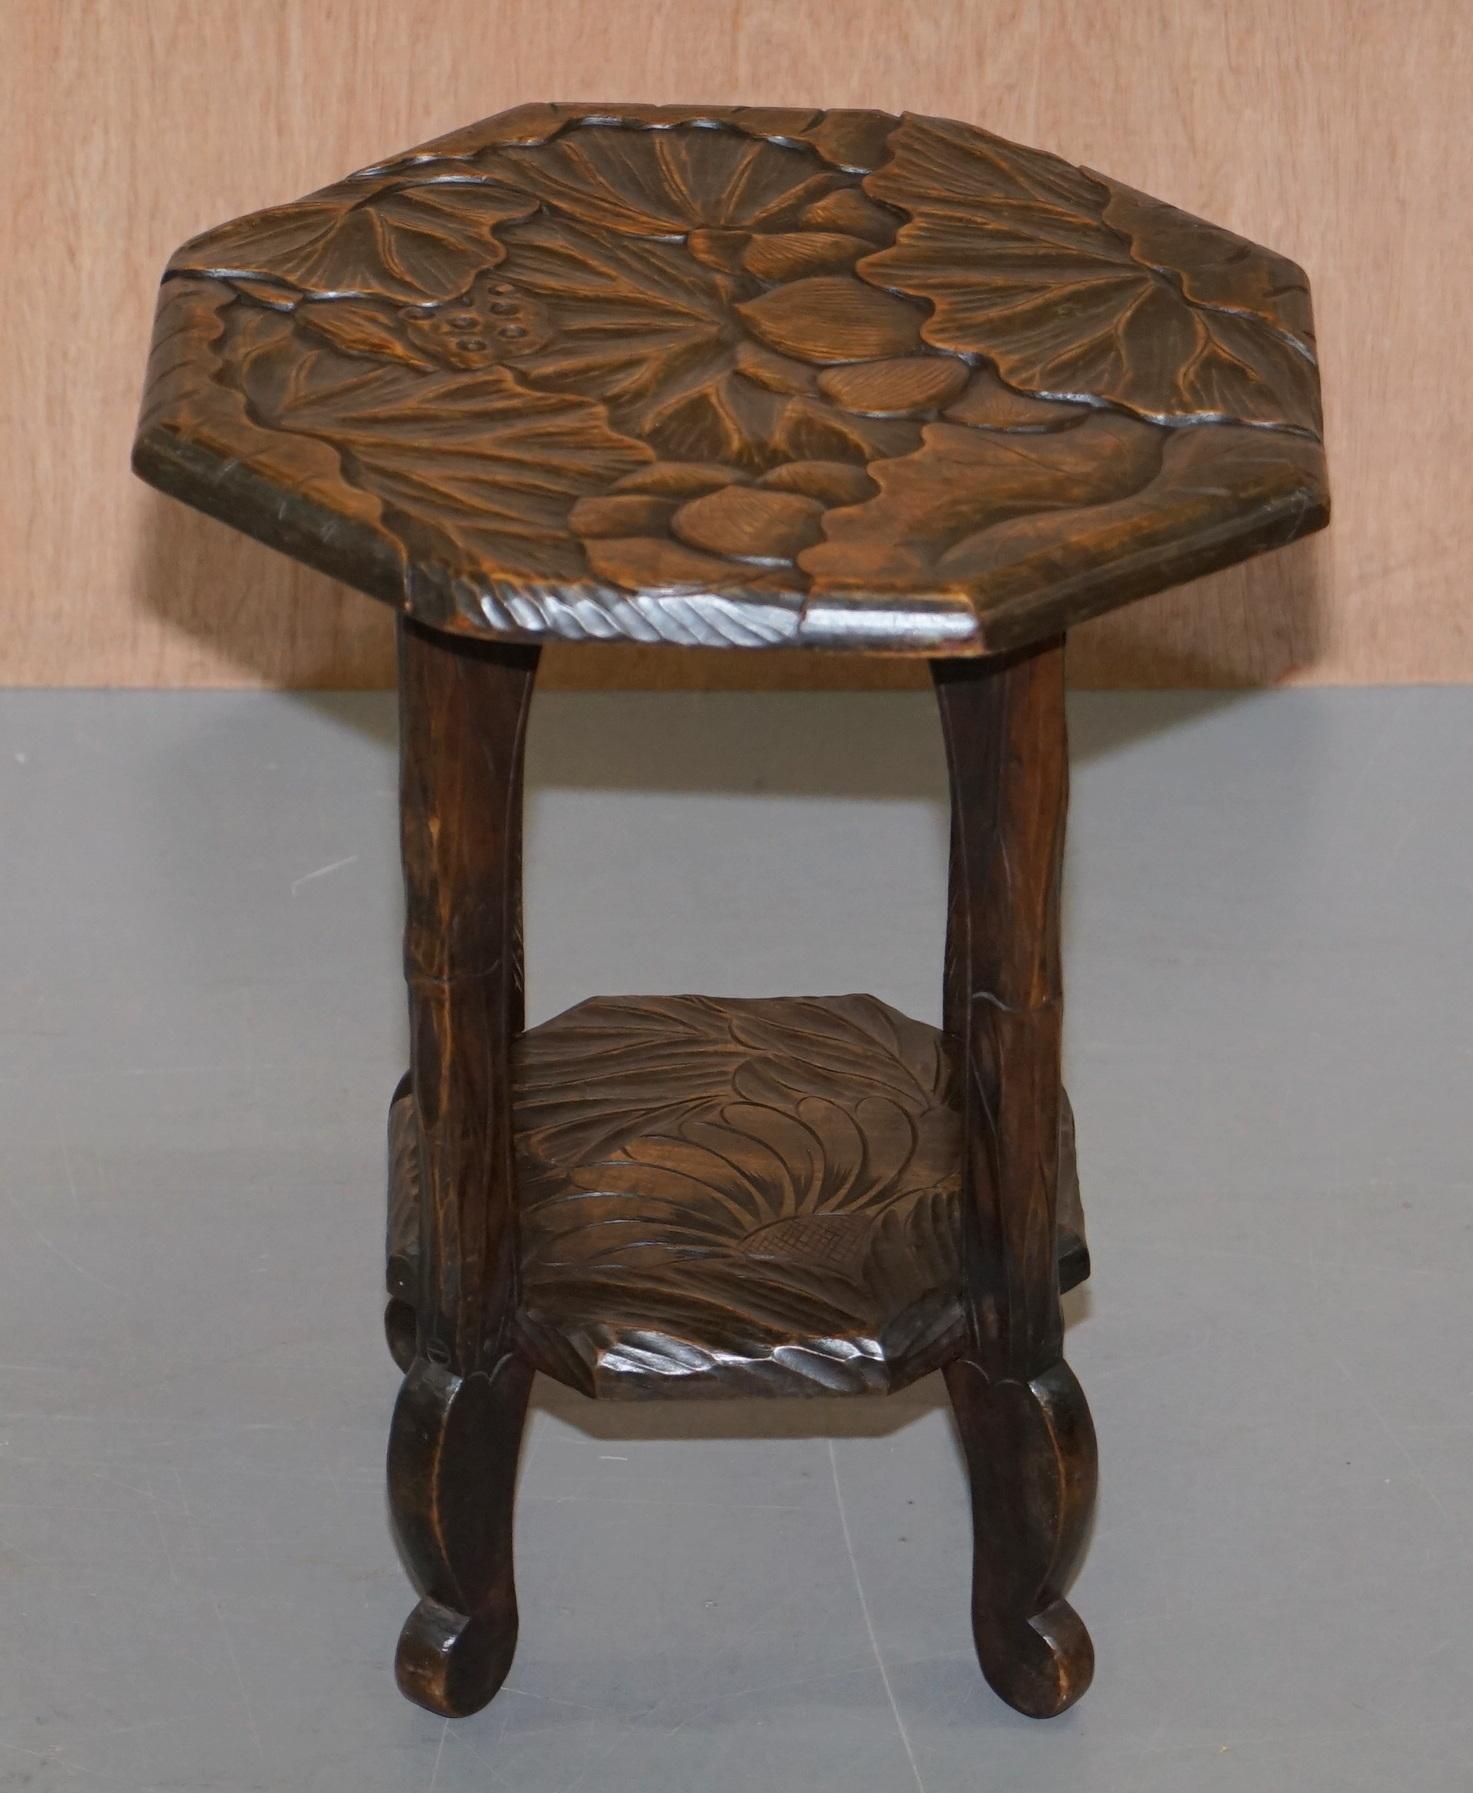 We are delighted to this lovely pair of Liberty’s London 1905 Japanese mahogany side tables

A good looking pair, they are hand carved from top to bottom with floral detailing, I have variations of these types of table and one very rare chair all